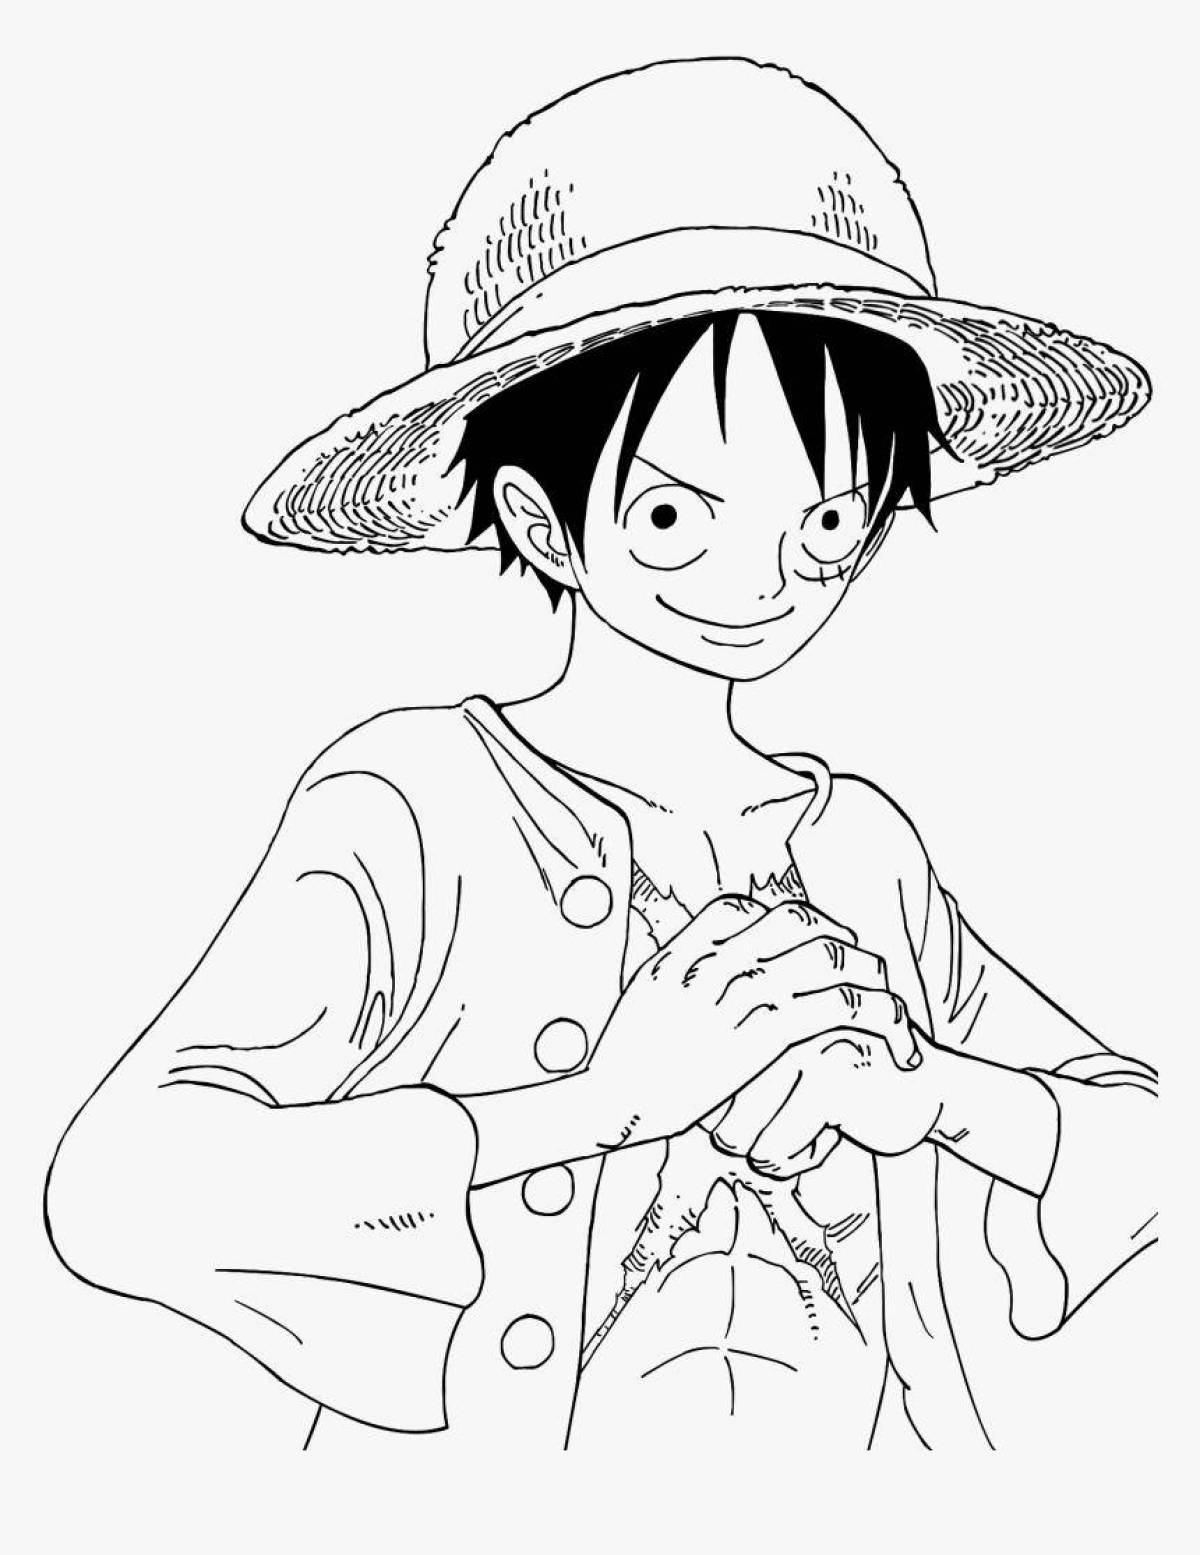 Daring luffy one piece coloring page